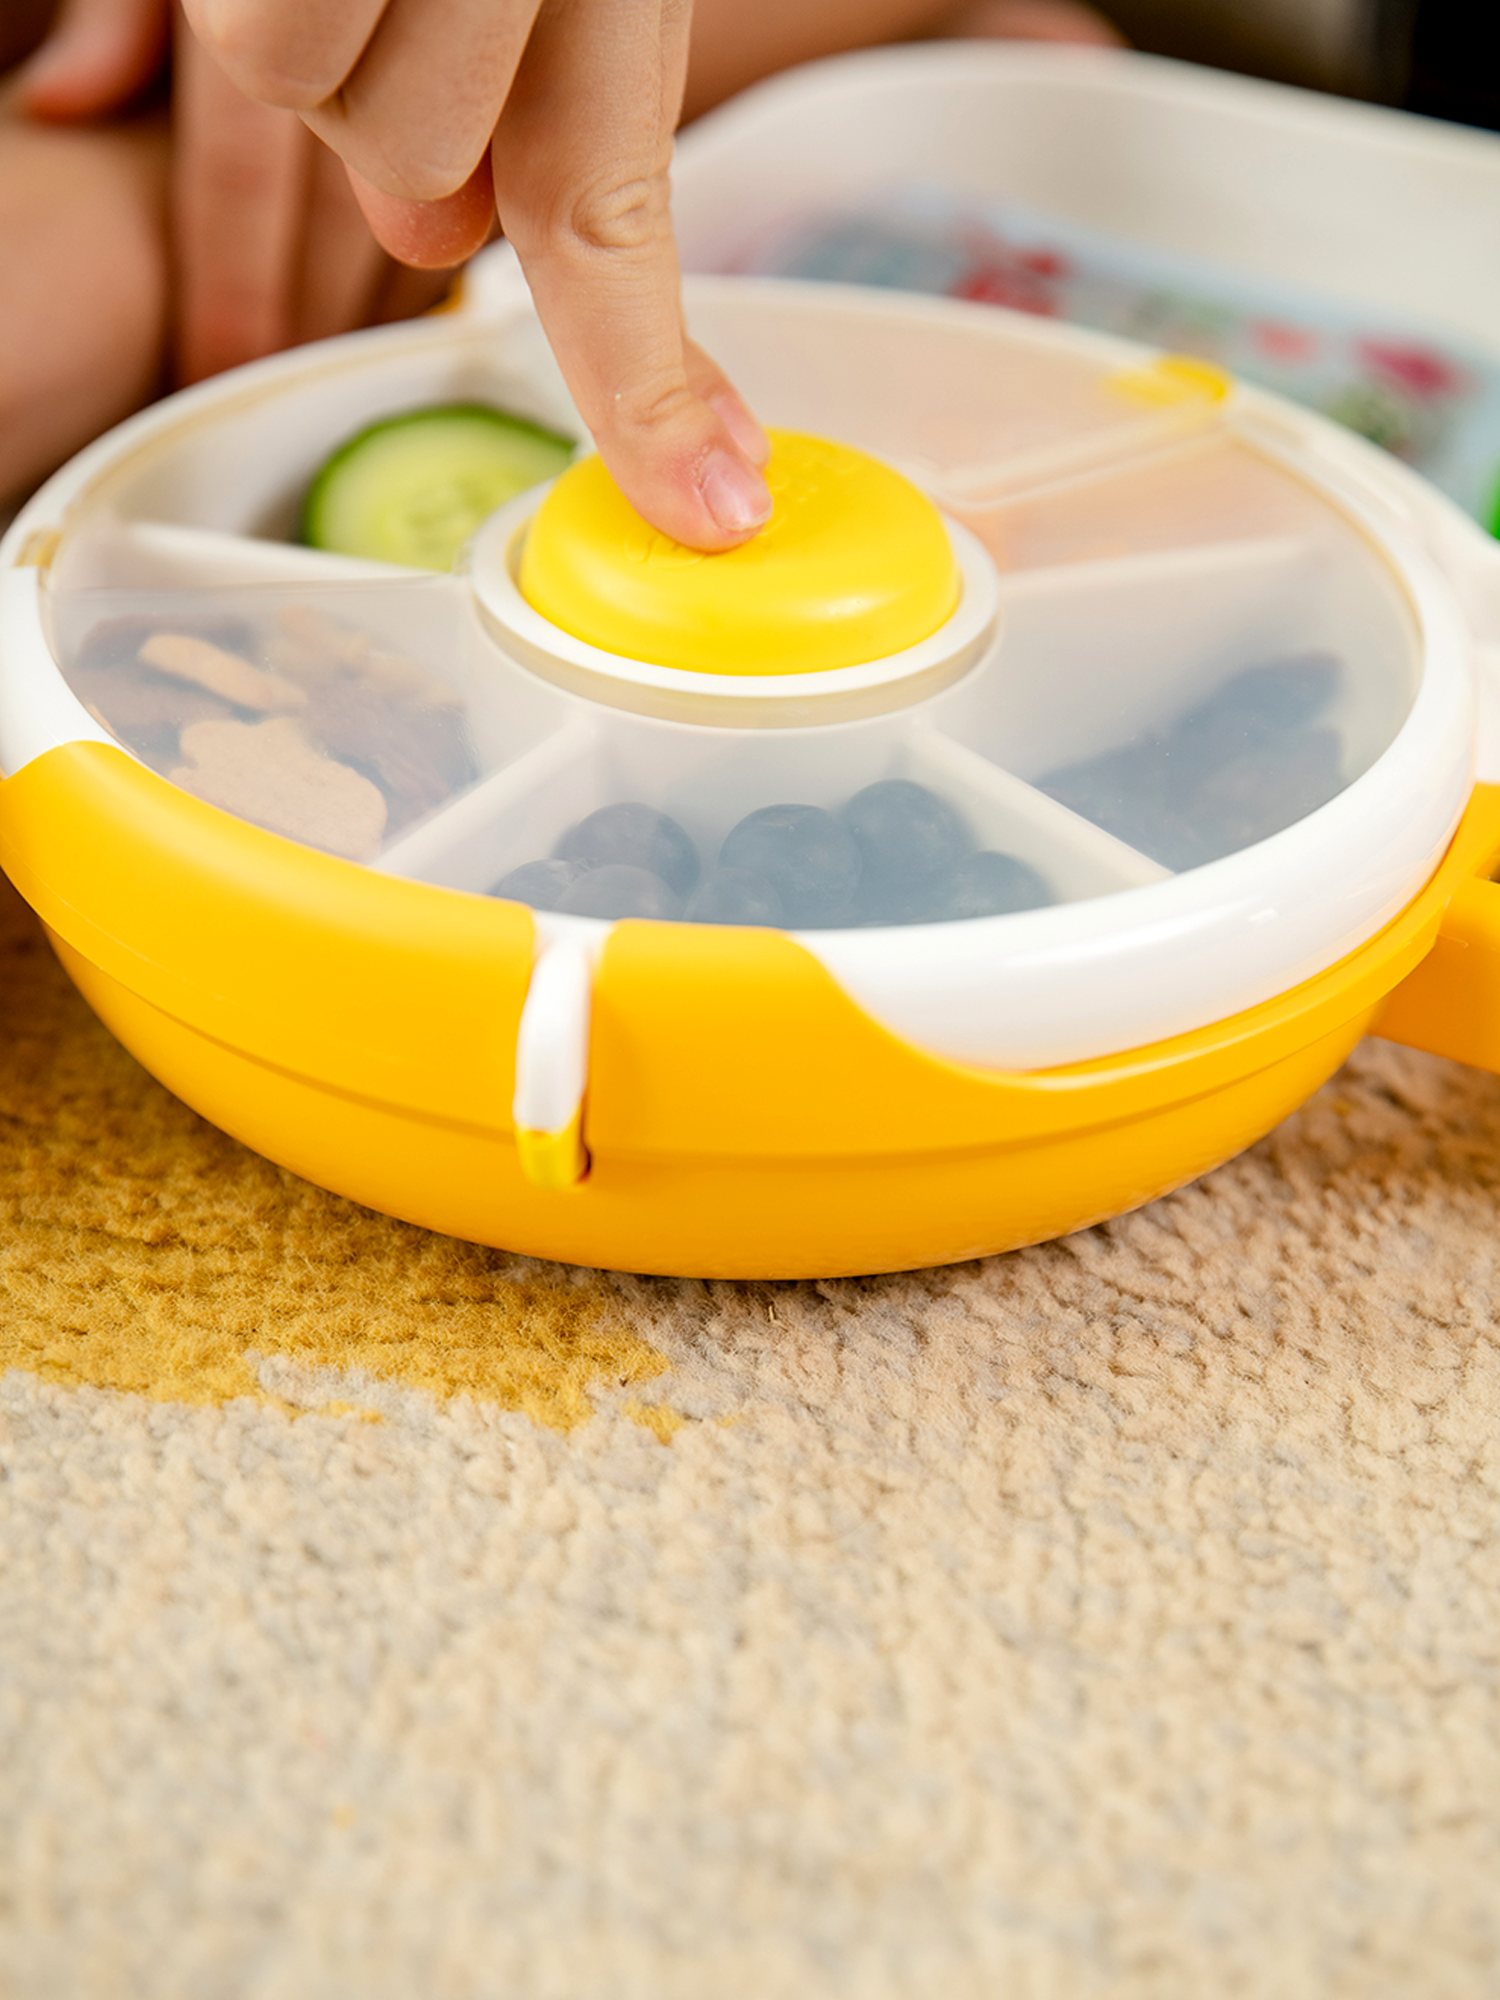 The new GoBe Snack Spinner Lunchbox has just arrived at The Bento